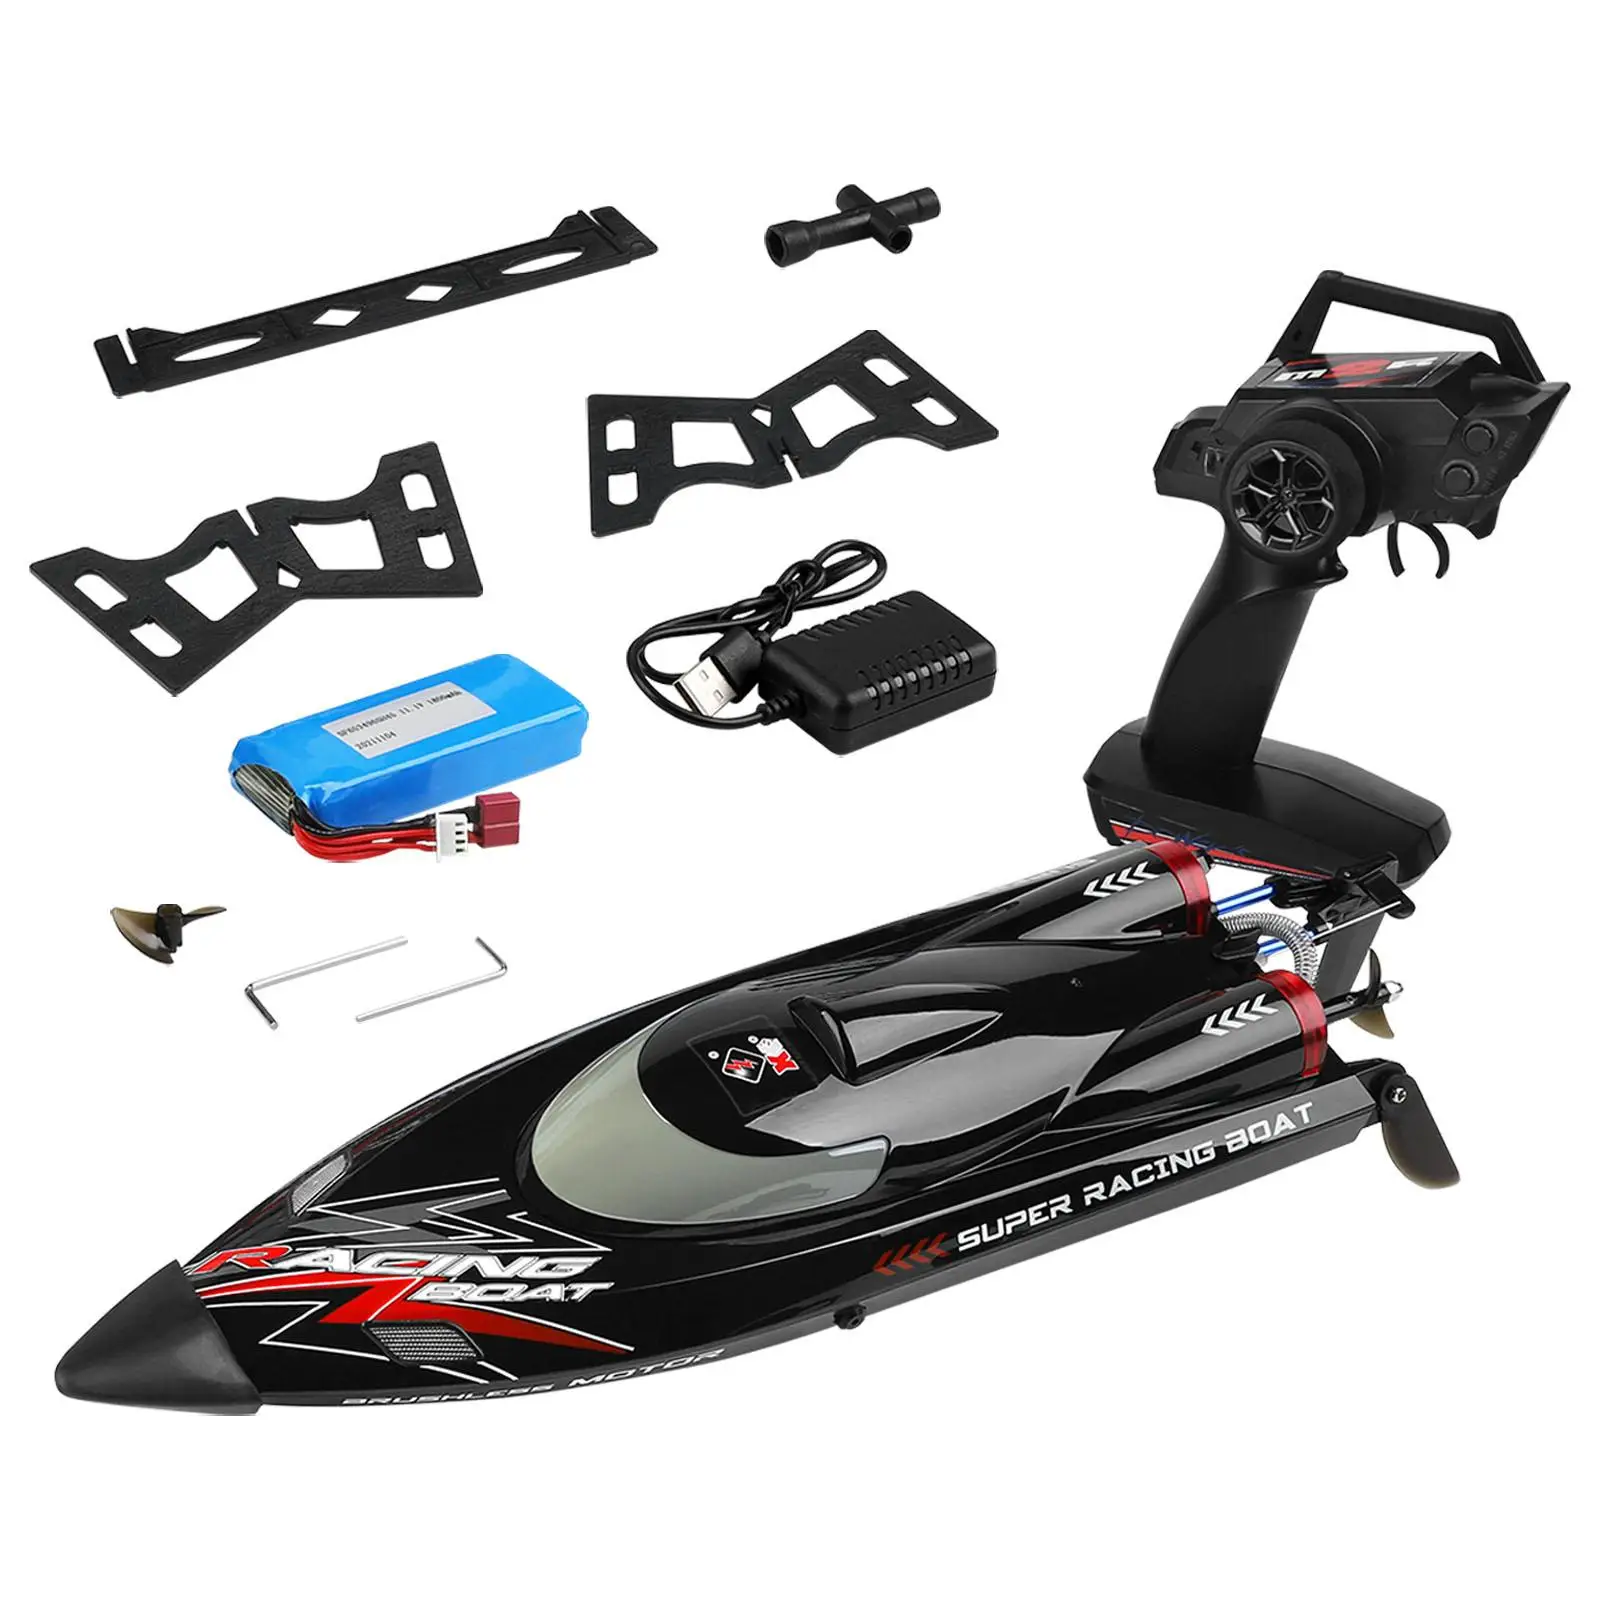  Boats Kids  Toy Left And Right High  Brushless ESC for Adults